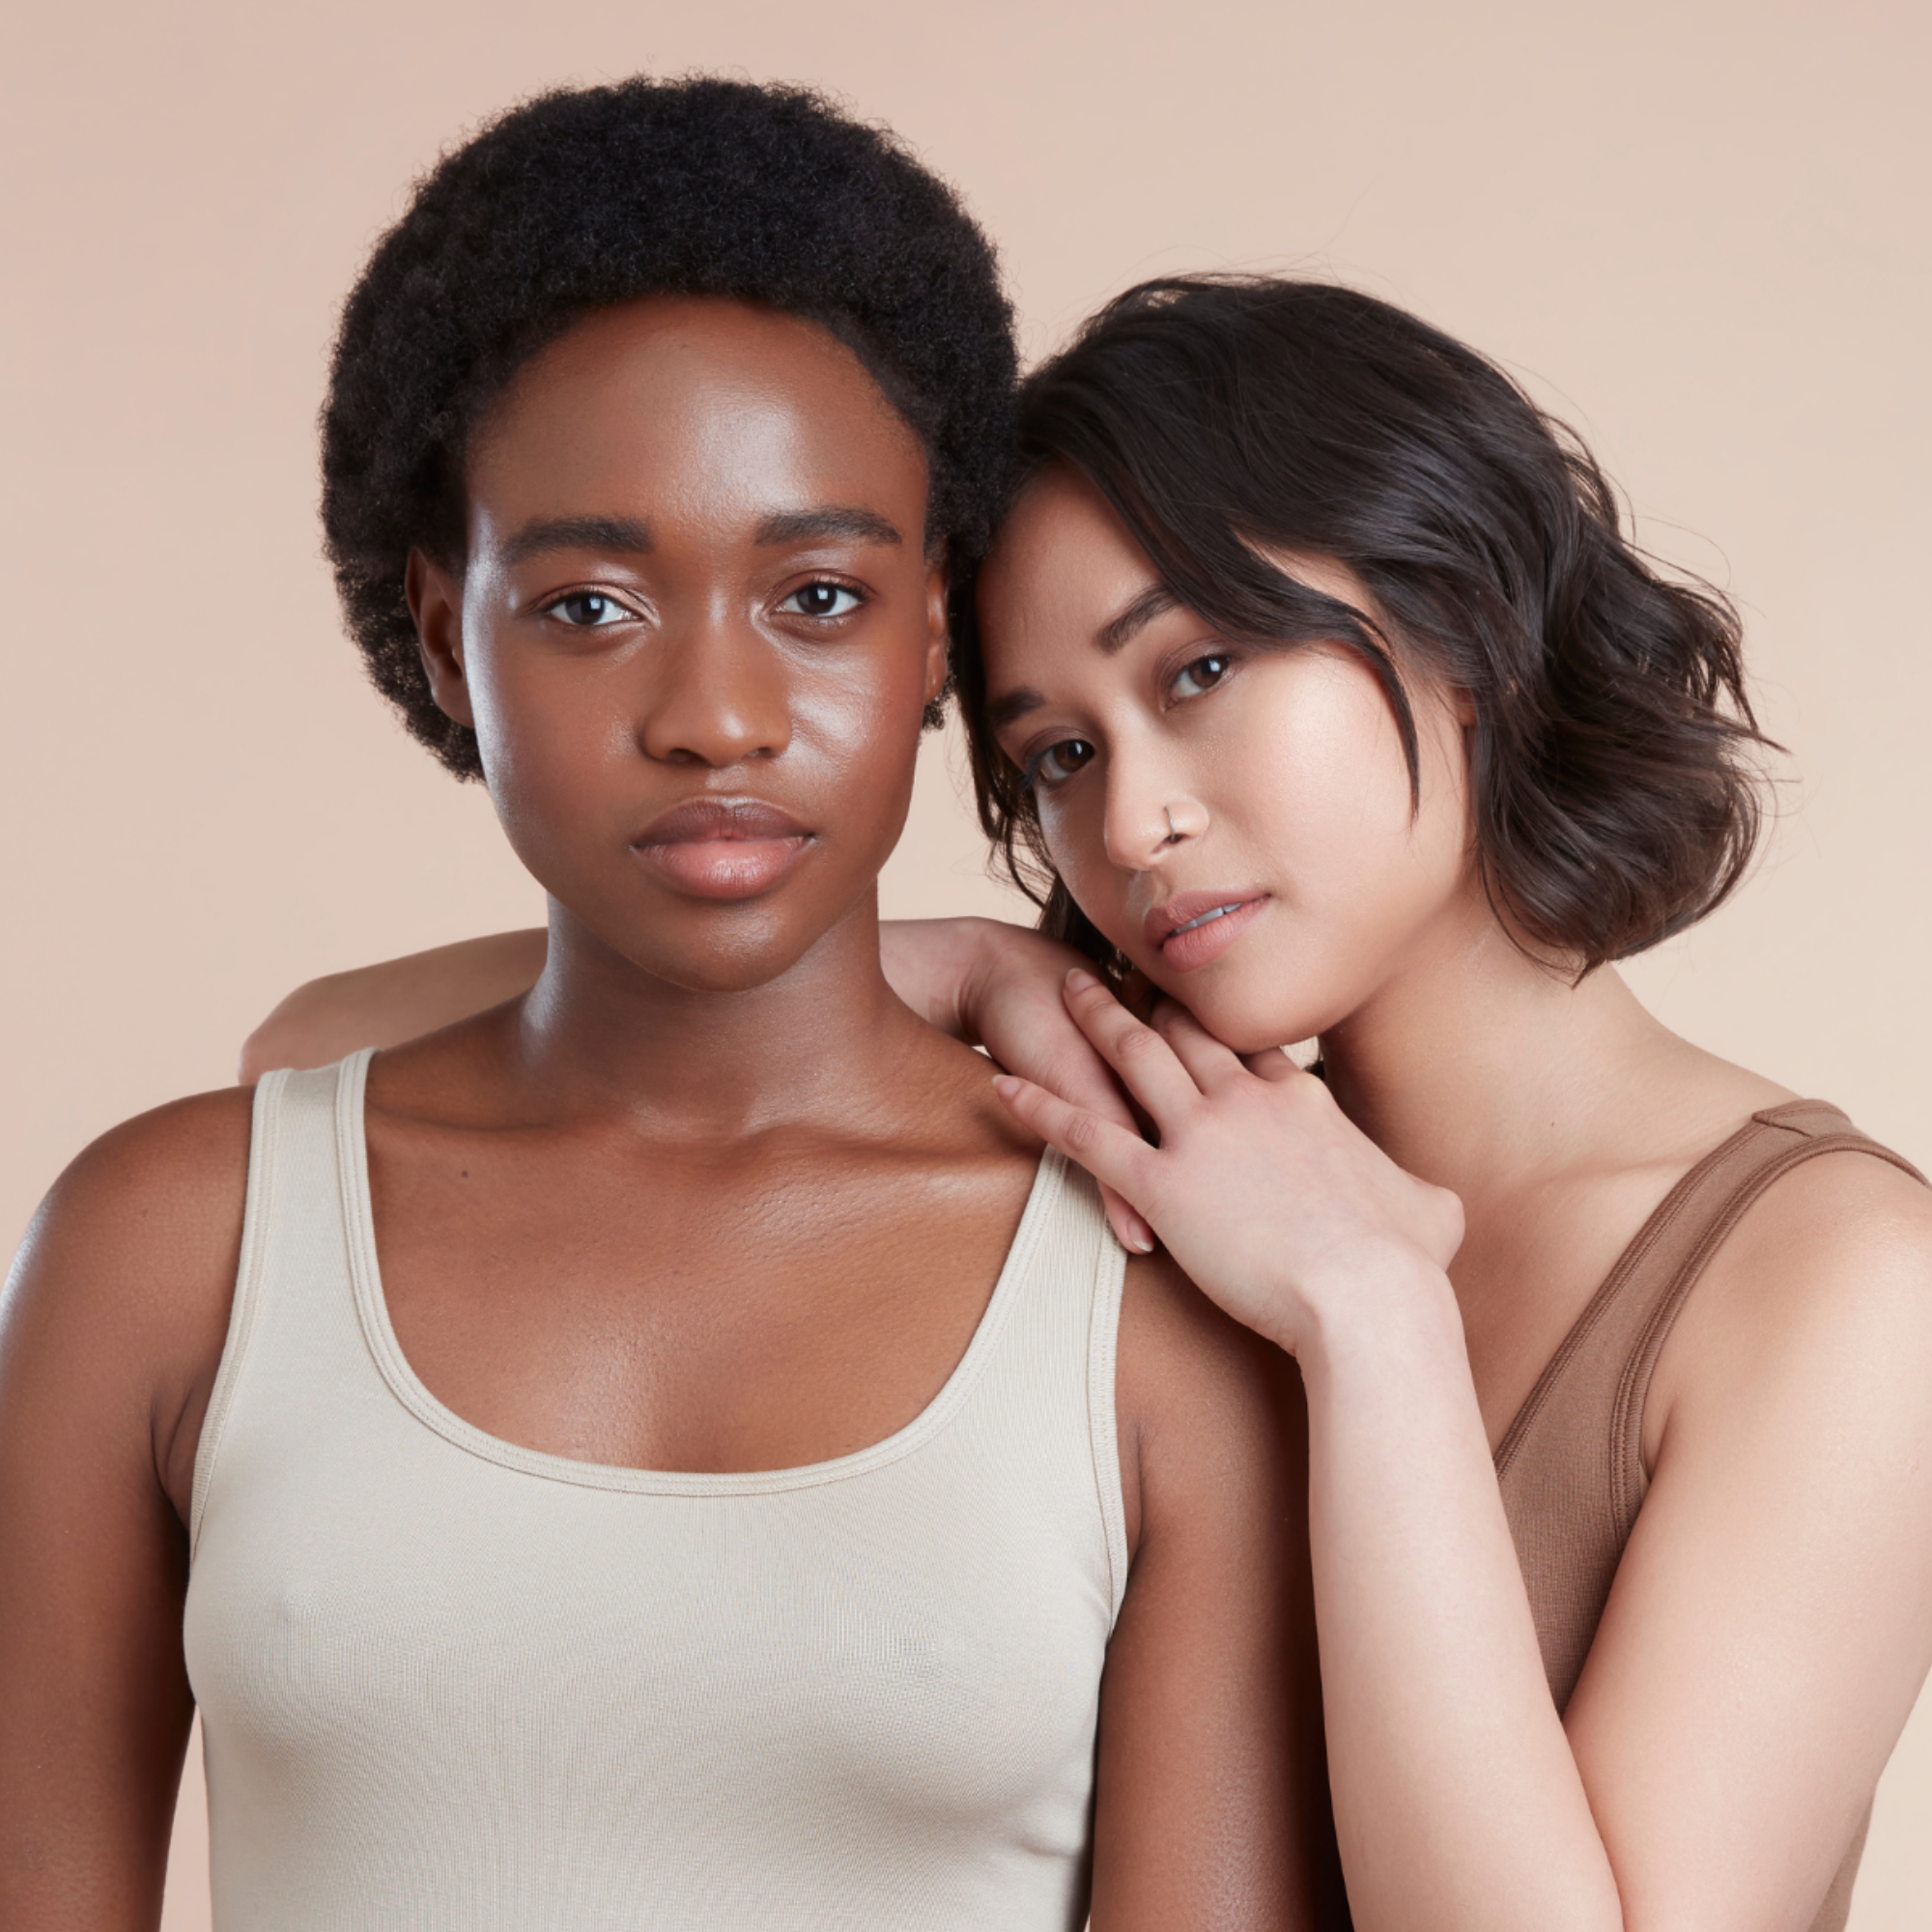 Image of twofemale models looking at the camera. One has bob hair, the other one has black textured natural hair. They are wearing neutral vest tops. Their skin is glowing and thier hair is healthy and shiny